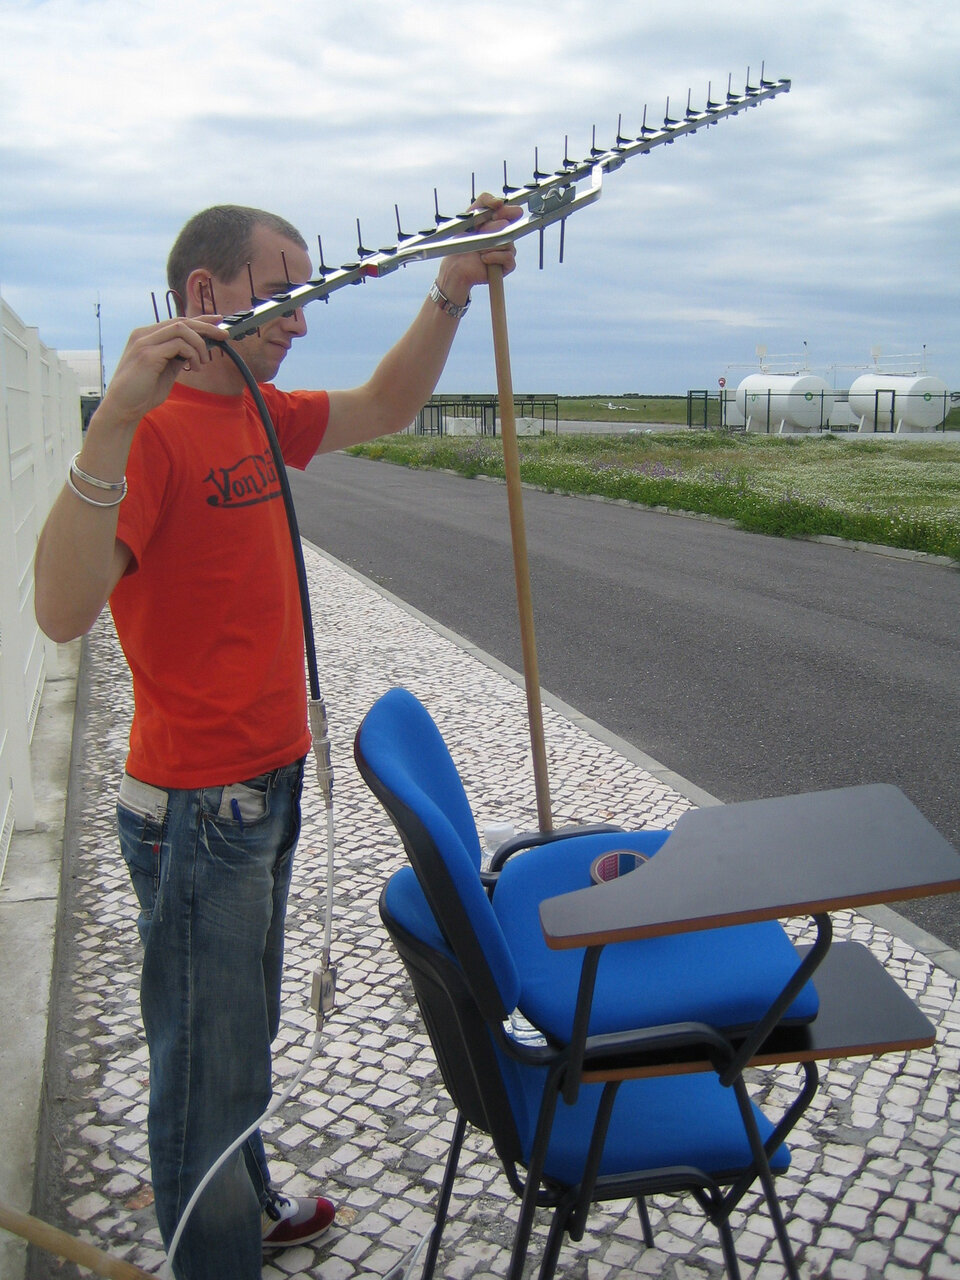 Orientation of the antenna for reception of the video of the flight